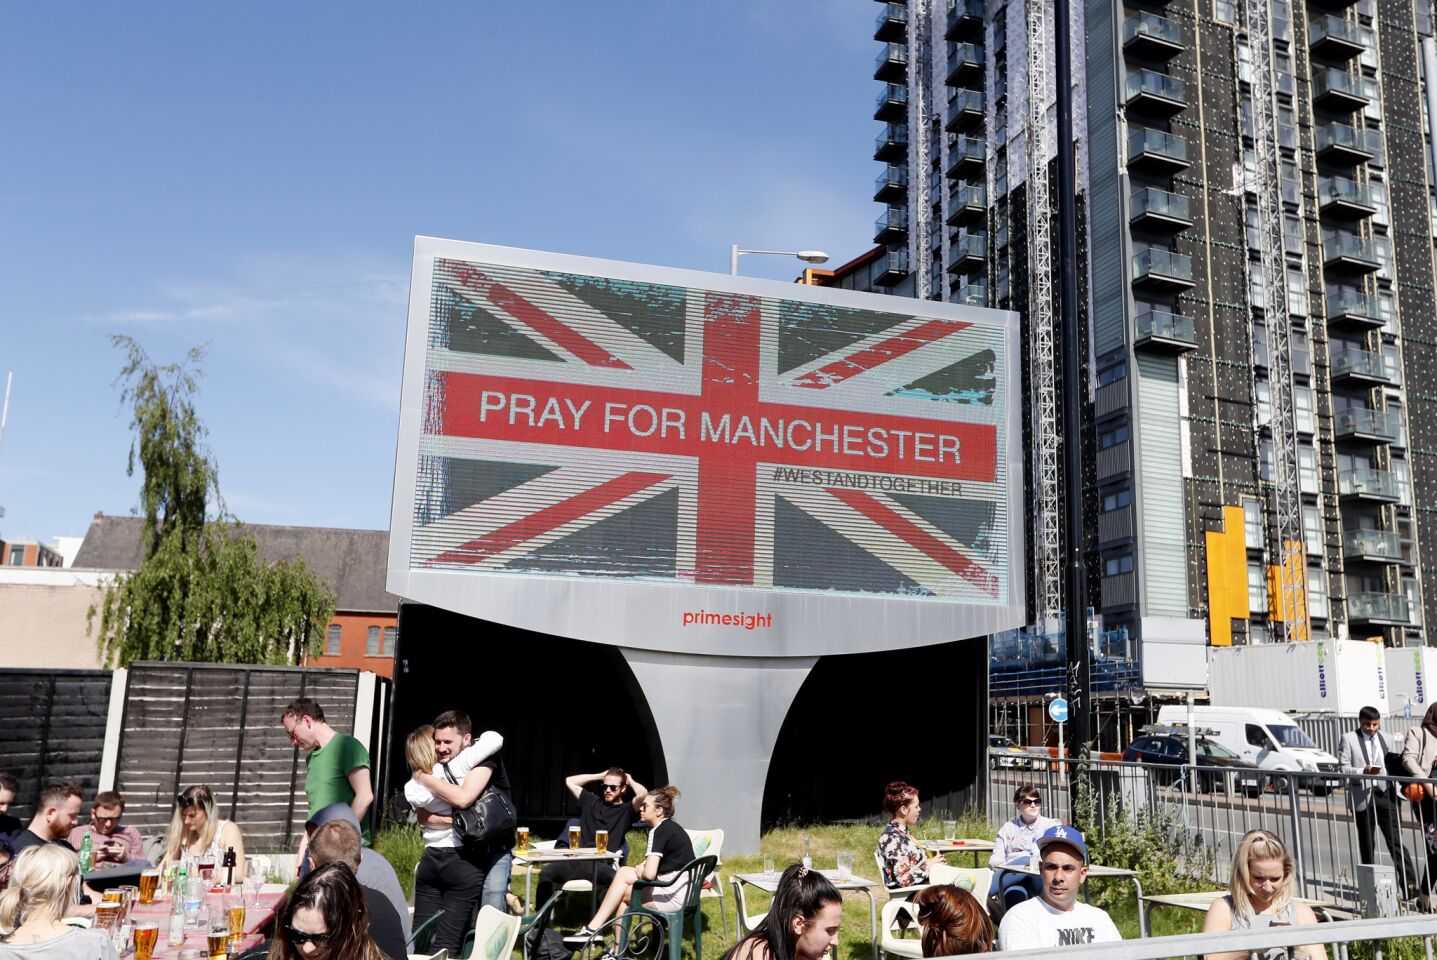 People sit under a billboard in Manchester city center on Tuesday.